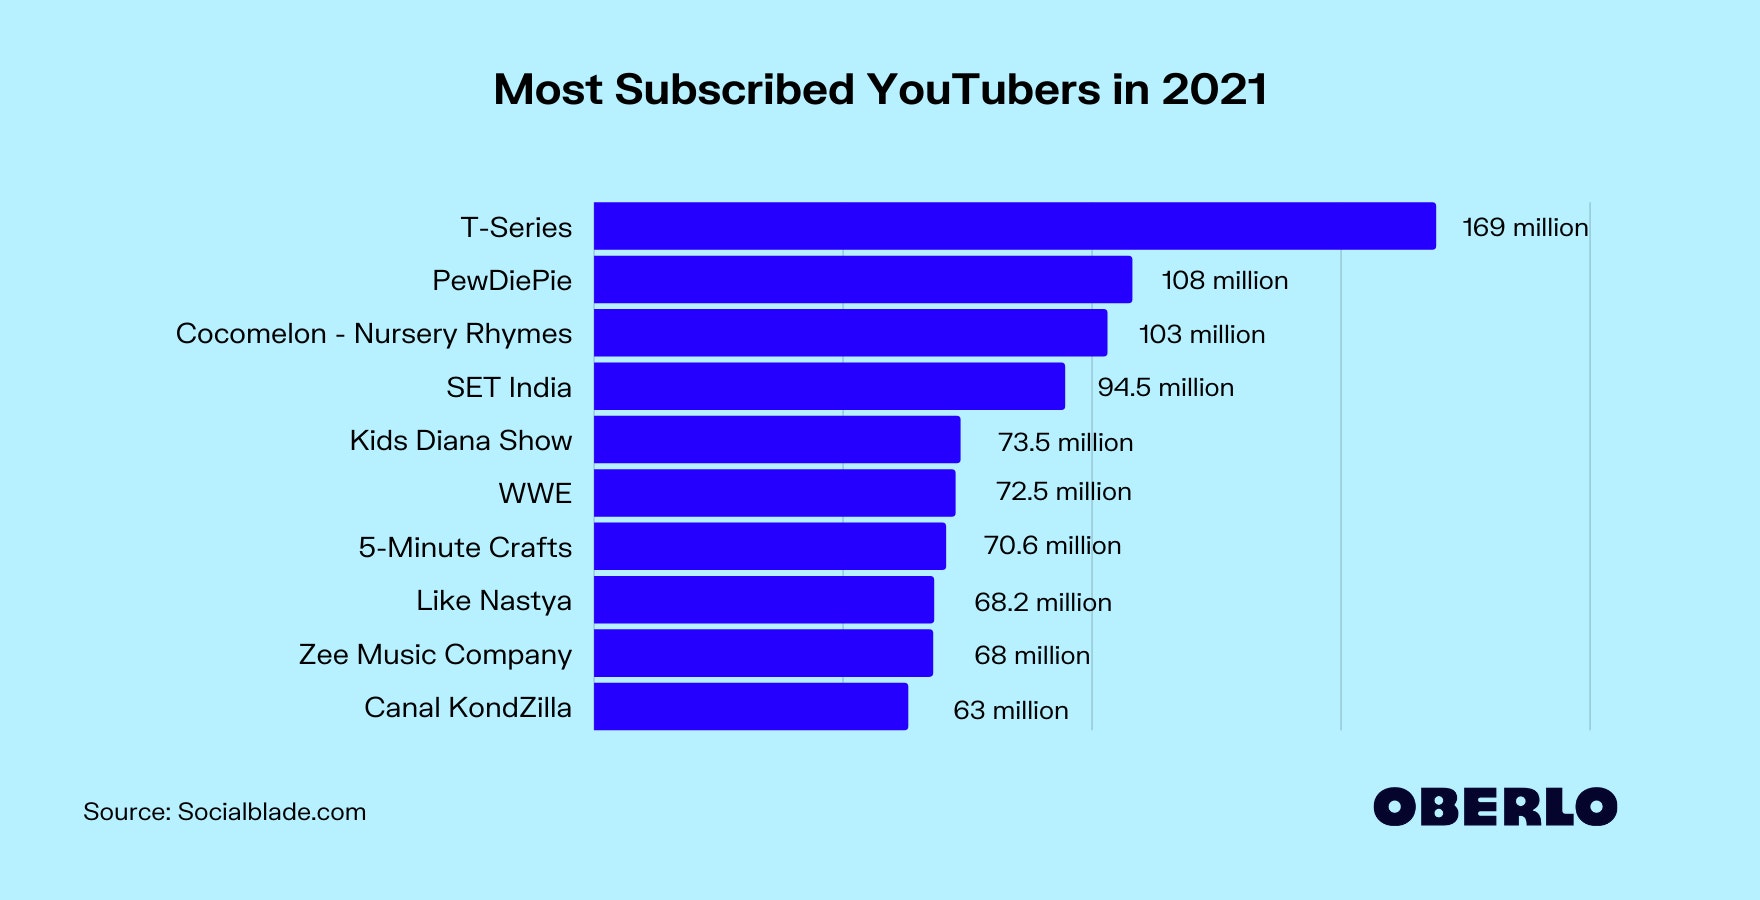 Most Subscribed YouTubers in 2021